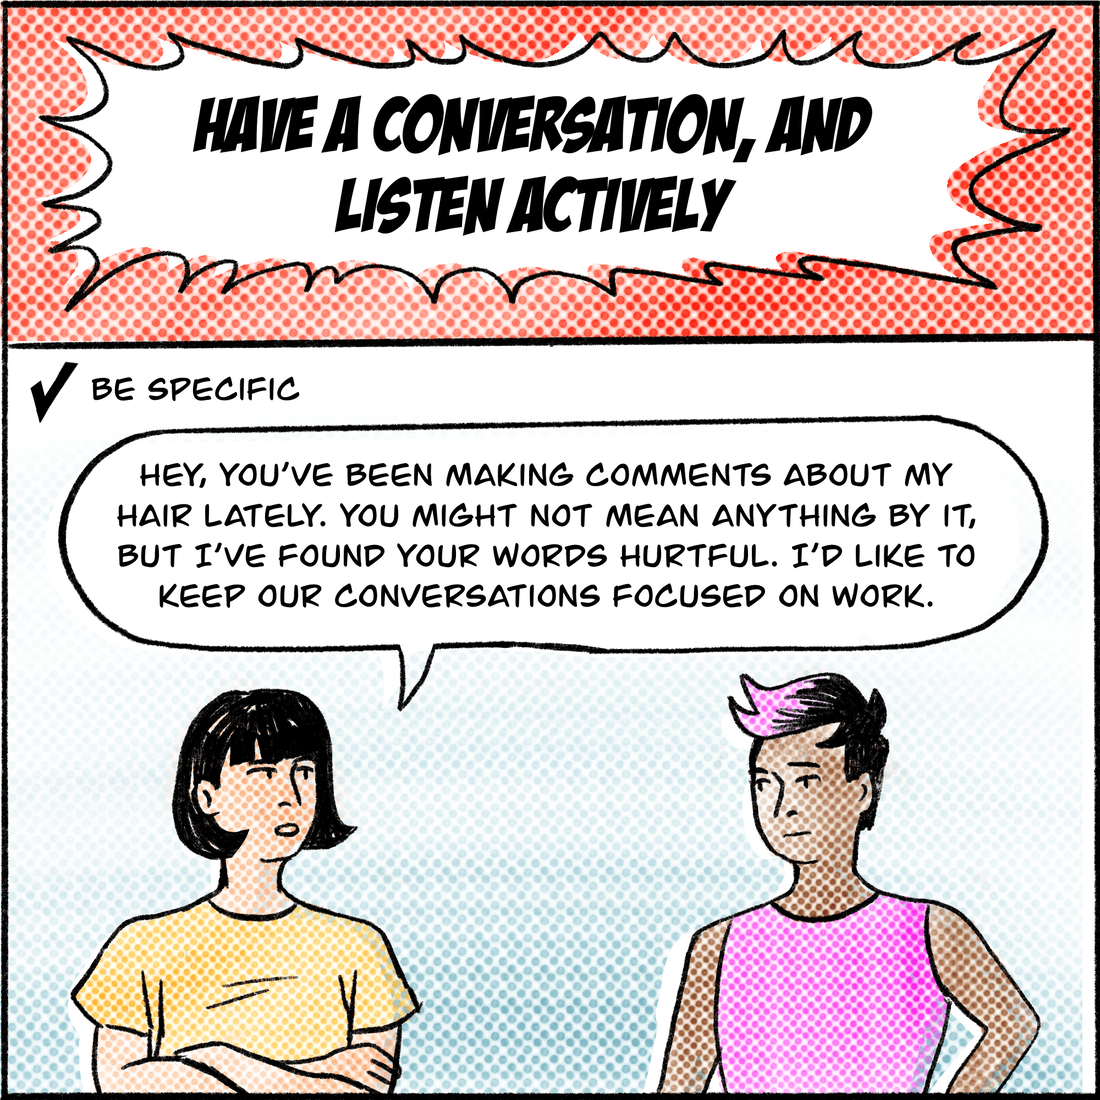 Have a conversation, and listen actively. Jo talks to Jane, a person with short pink hair. Tip 1: Be specific. "Hey, you've been making comments about my hair lately," Jo says. "You might not mean anything by it, but I've found your words hurtful. I'd like to keep our conversations focused on work."